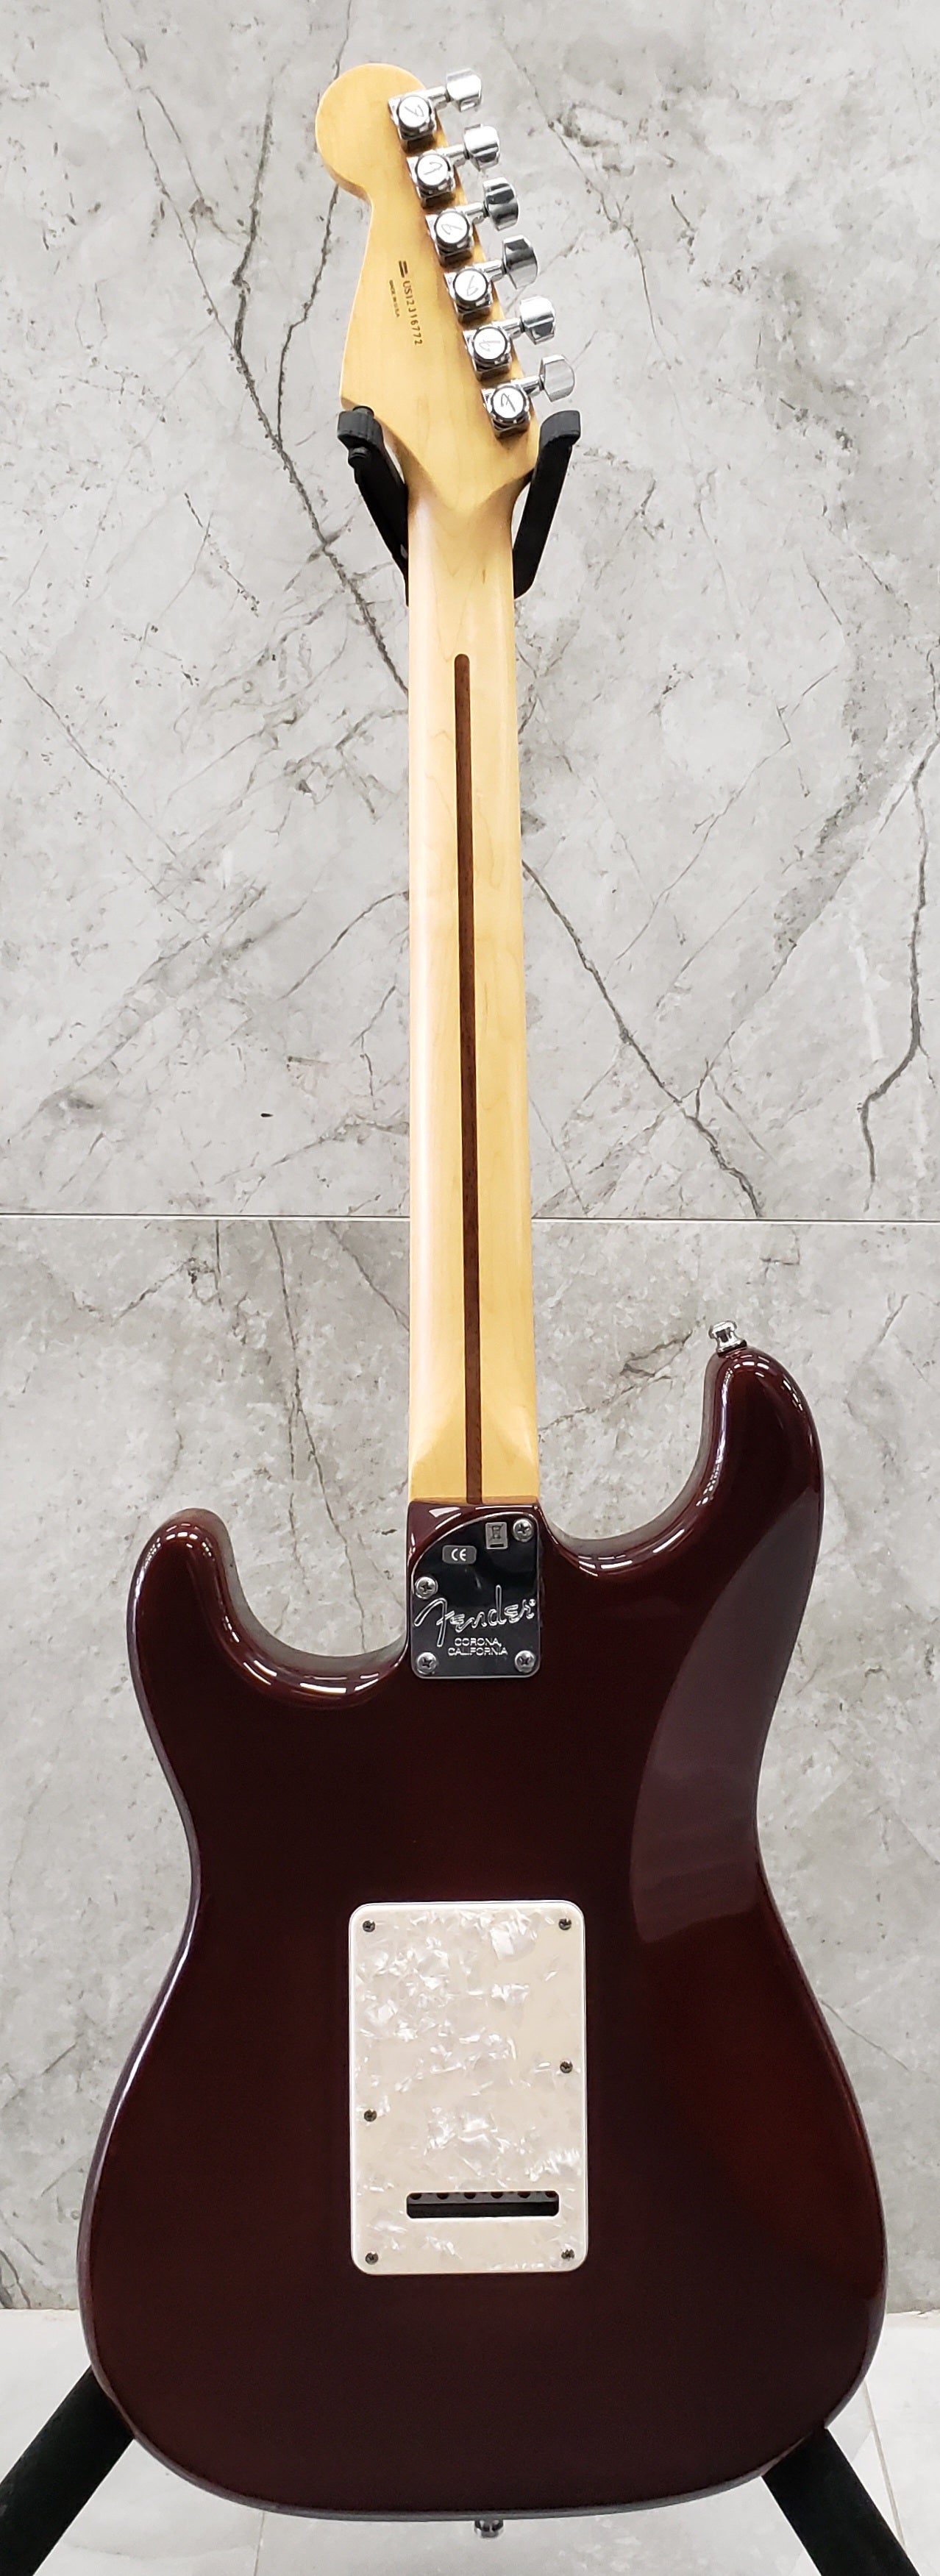 Fender American Design Stratocaster Rosewood Brown Stain 0181000060 SERIAL NUMBER US12316772 - 7.6 LBS